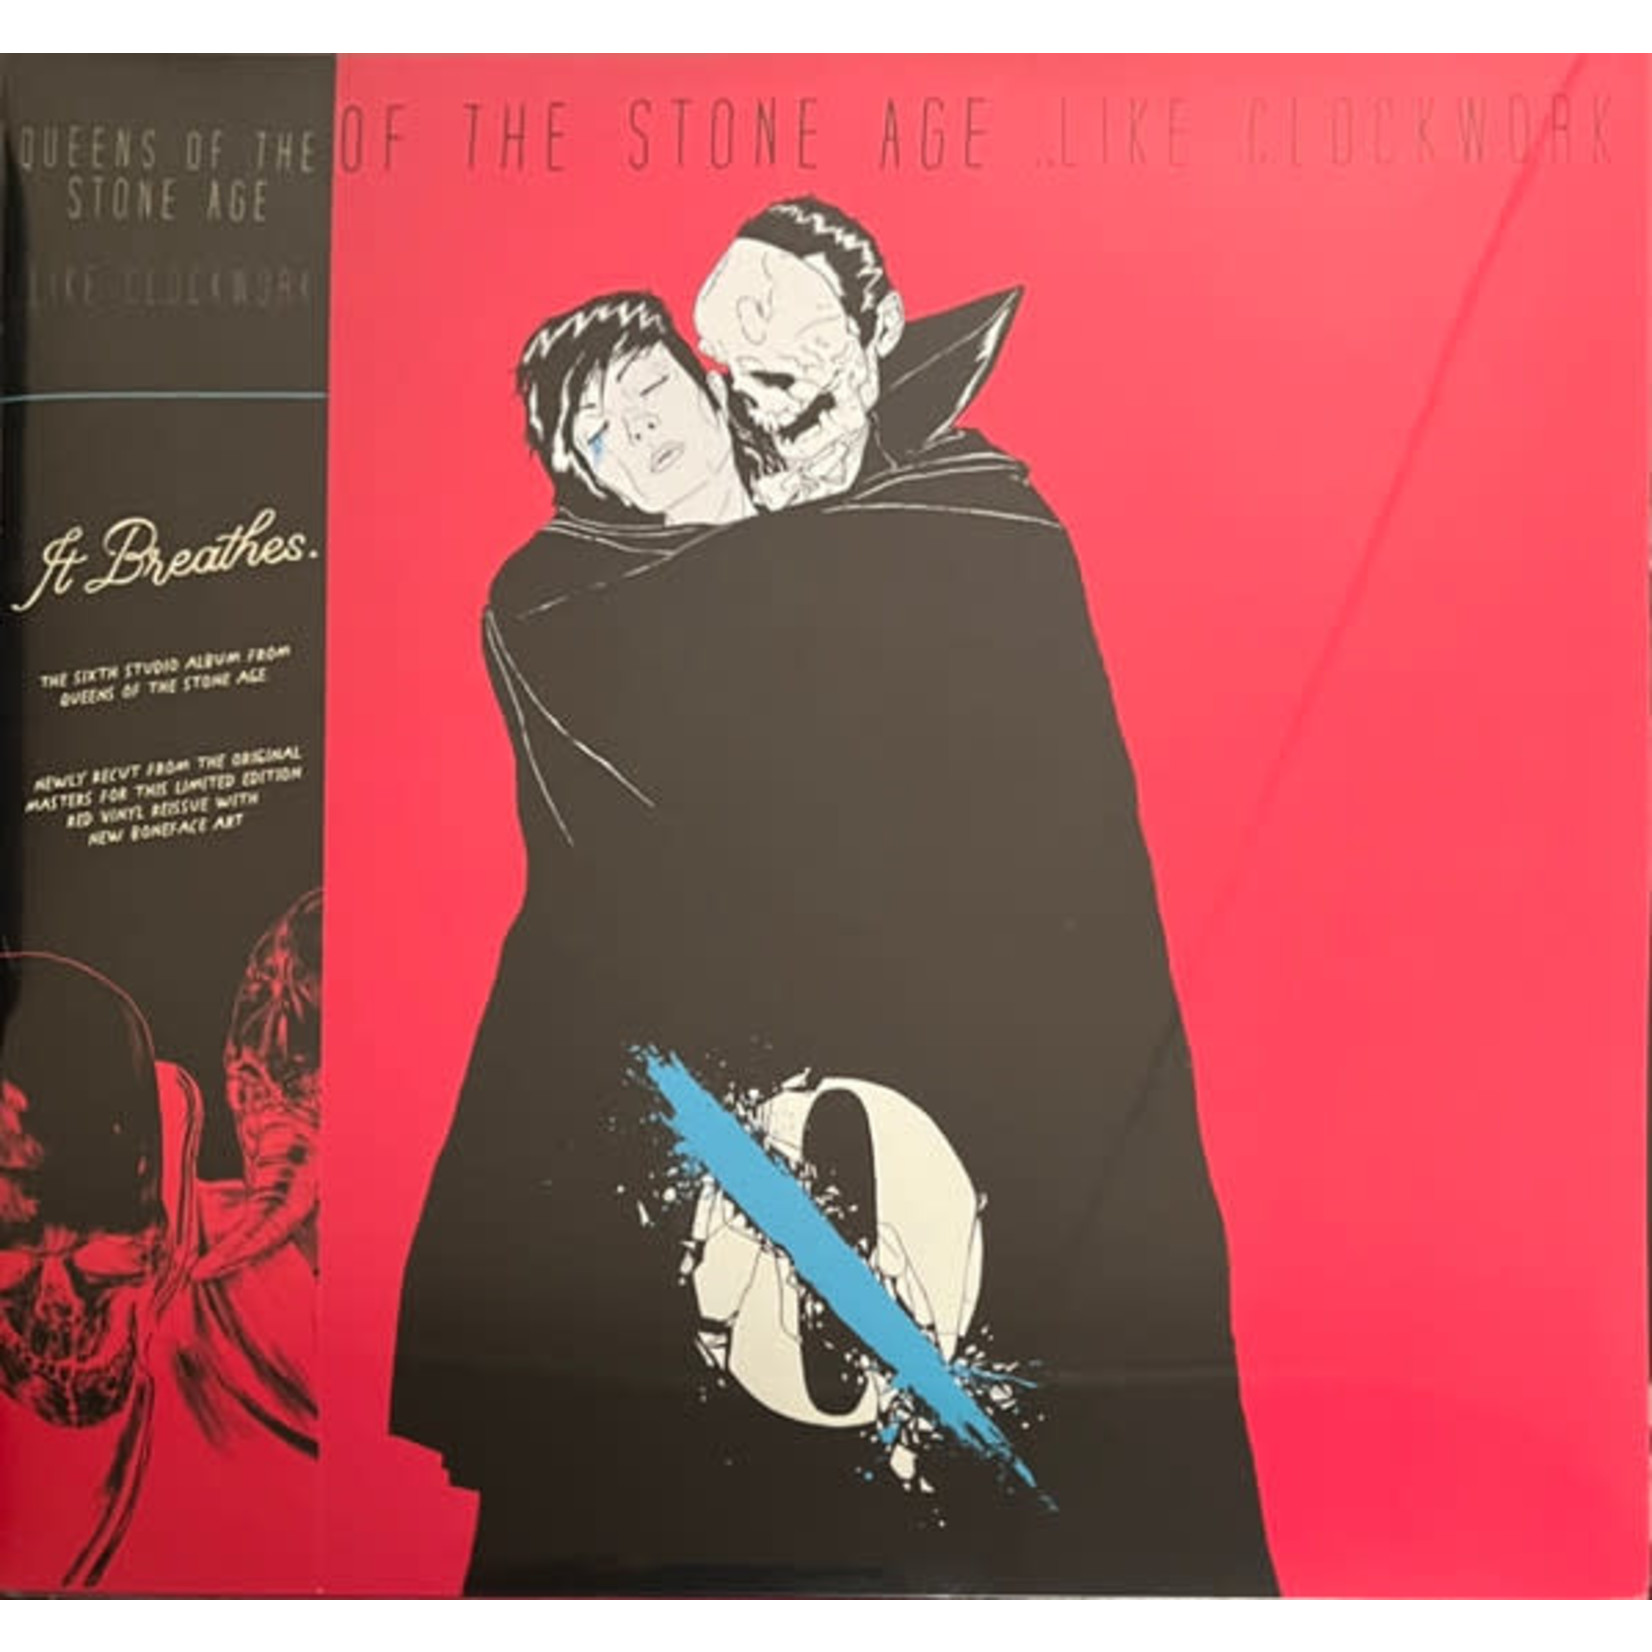 [New] Queens of the Stone Age - Like Clockwork (2LP, red vinyl, re-issue)